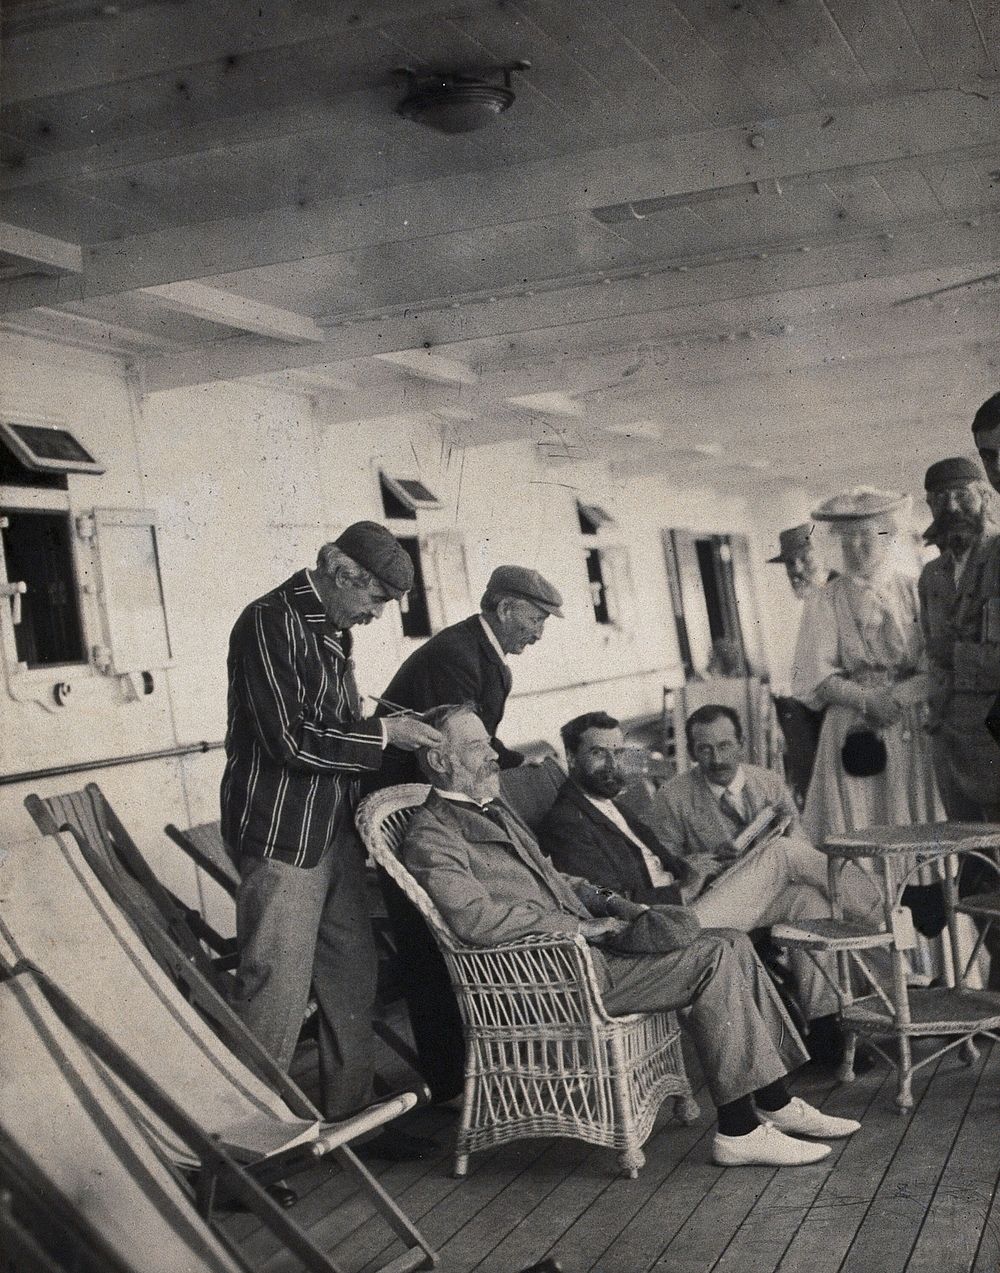 Members of the British Association playing at phrenology on board a ship on its way to South Africa. Photograph by J.T.…